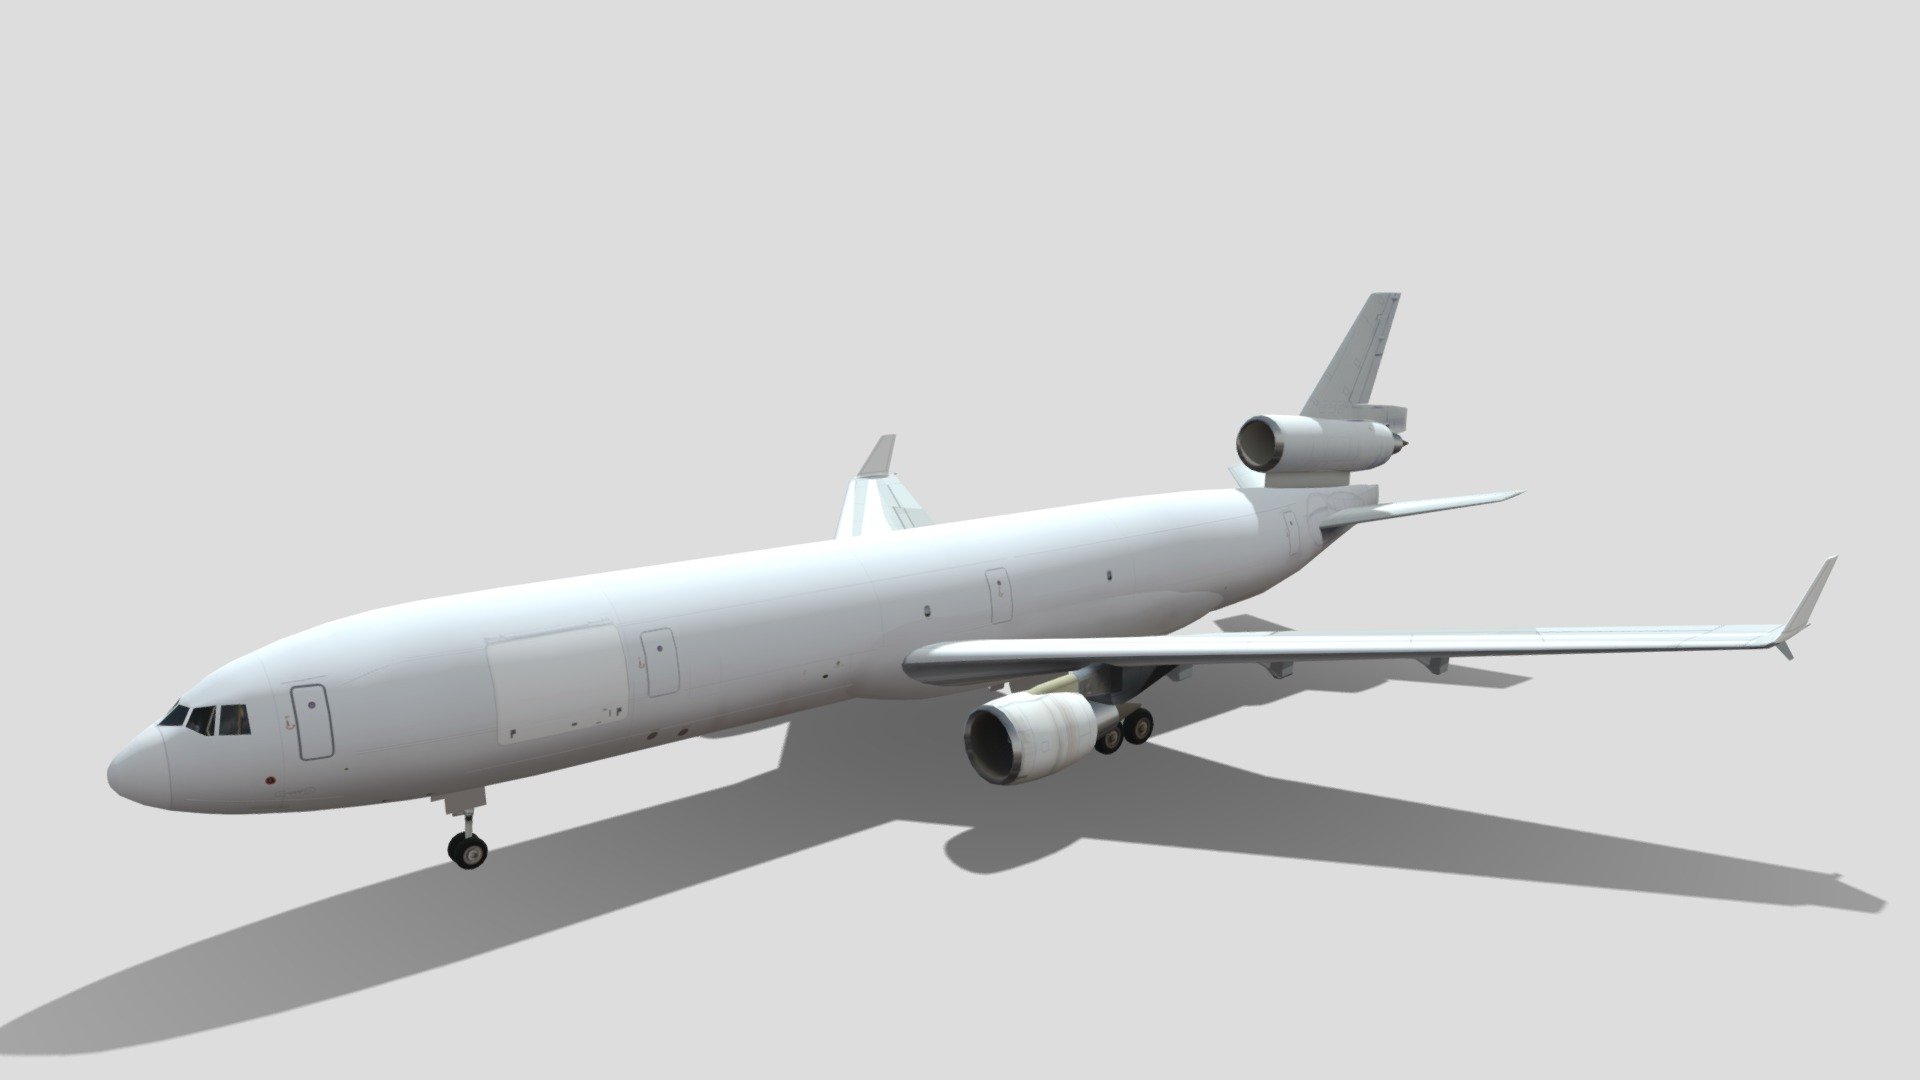 This is a meticulously crafted 3D low-poly model of a McDonnell Douglas MD-11, optimized for minimal complexity with less than 5000 polygons. Despite its low polygon count, the model accurately captures the iconic design and aerodynamic features of the McDonnell Douglas MD-11, making it ideal for real-time rendering in games or simulations.
The model comes with a blank layered texture, providing a clean slate for customization. This allows you to apply your own color schemes, decals, or airline branding. The layered structure of the texture file offers flexibility in modifying different parts of the aircraft separately, such as the fuselage, wings, engines, and tail.
In summary, this McDonnell Douglas MD-11 low-poly model is a perfect blend of simplicity, accuracy, and customizability, making it a versatile asset for any 3D project 3d model